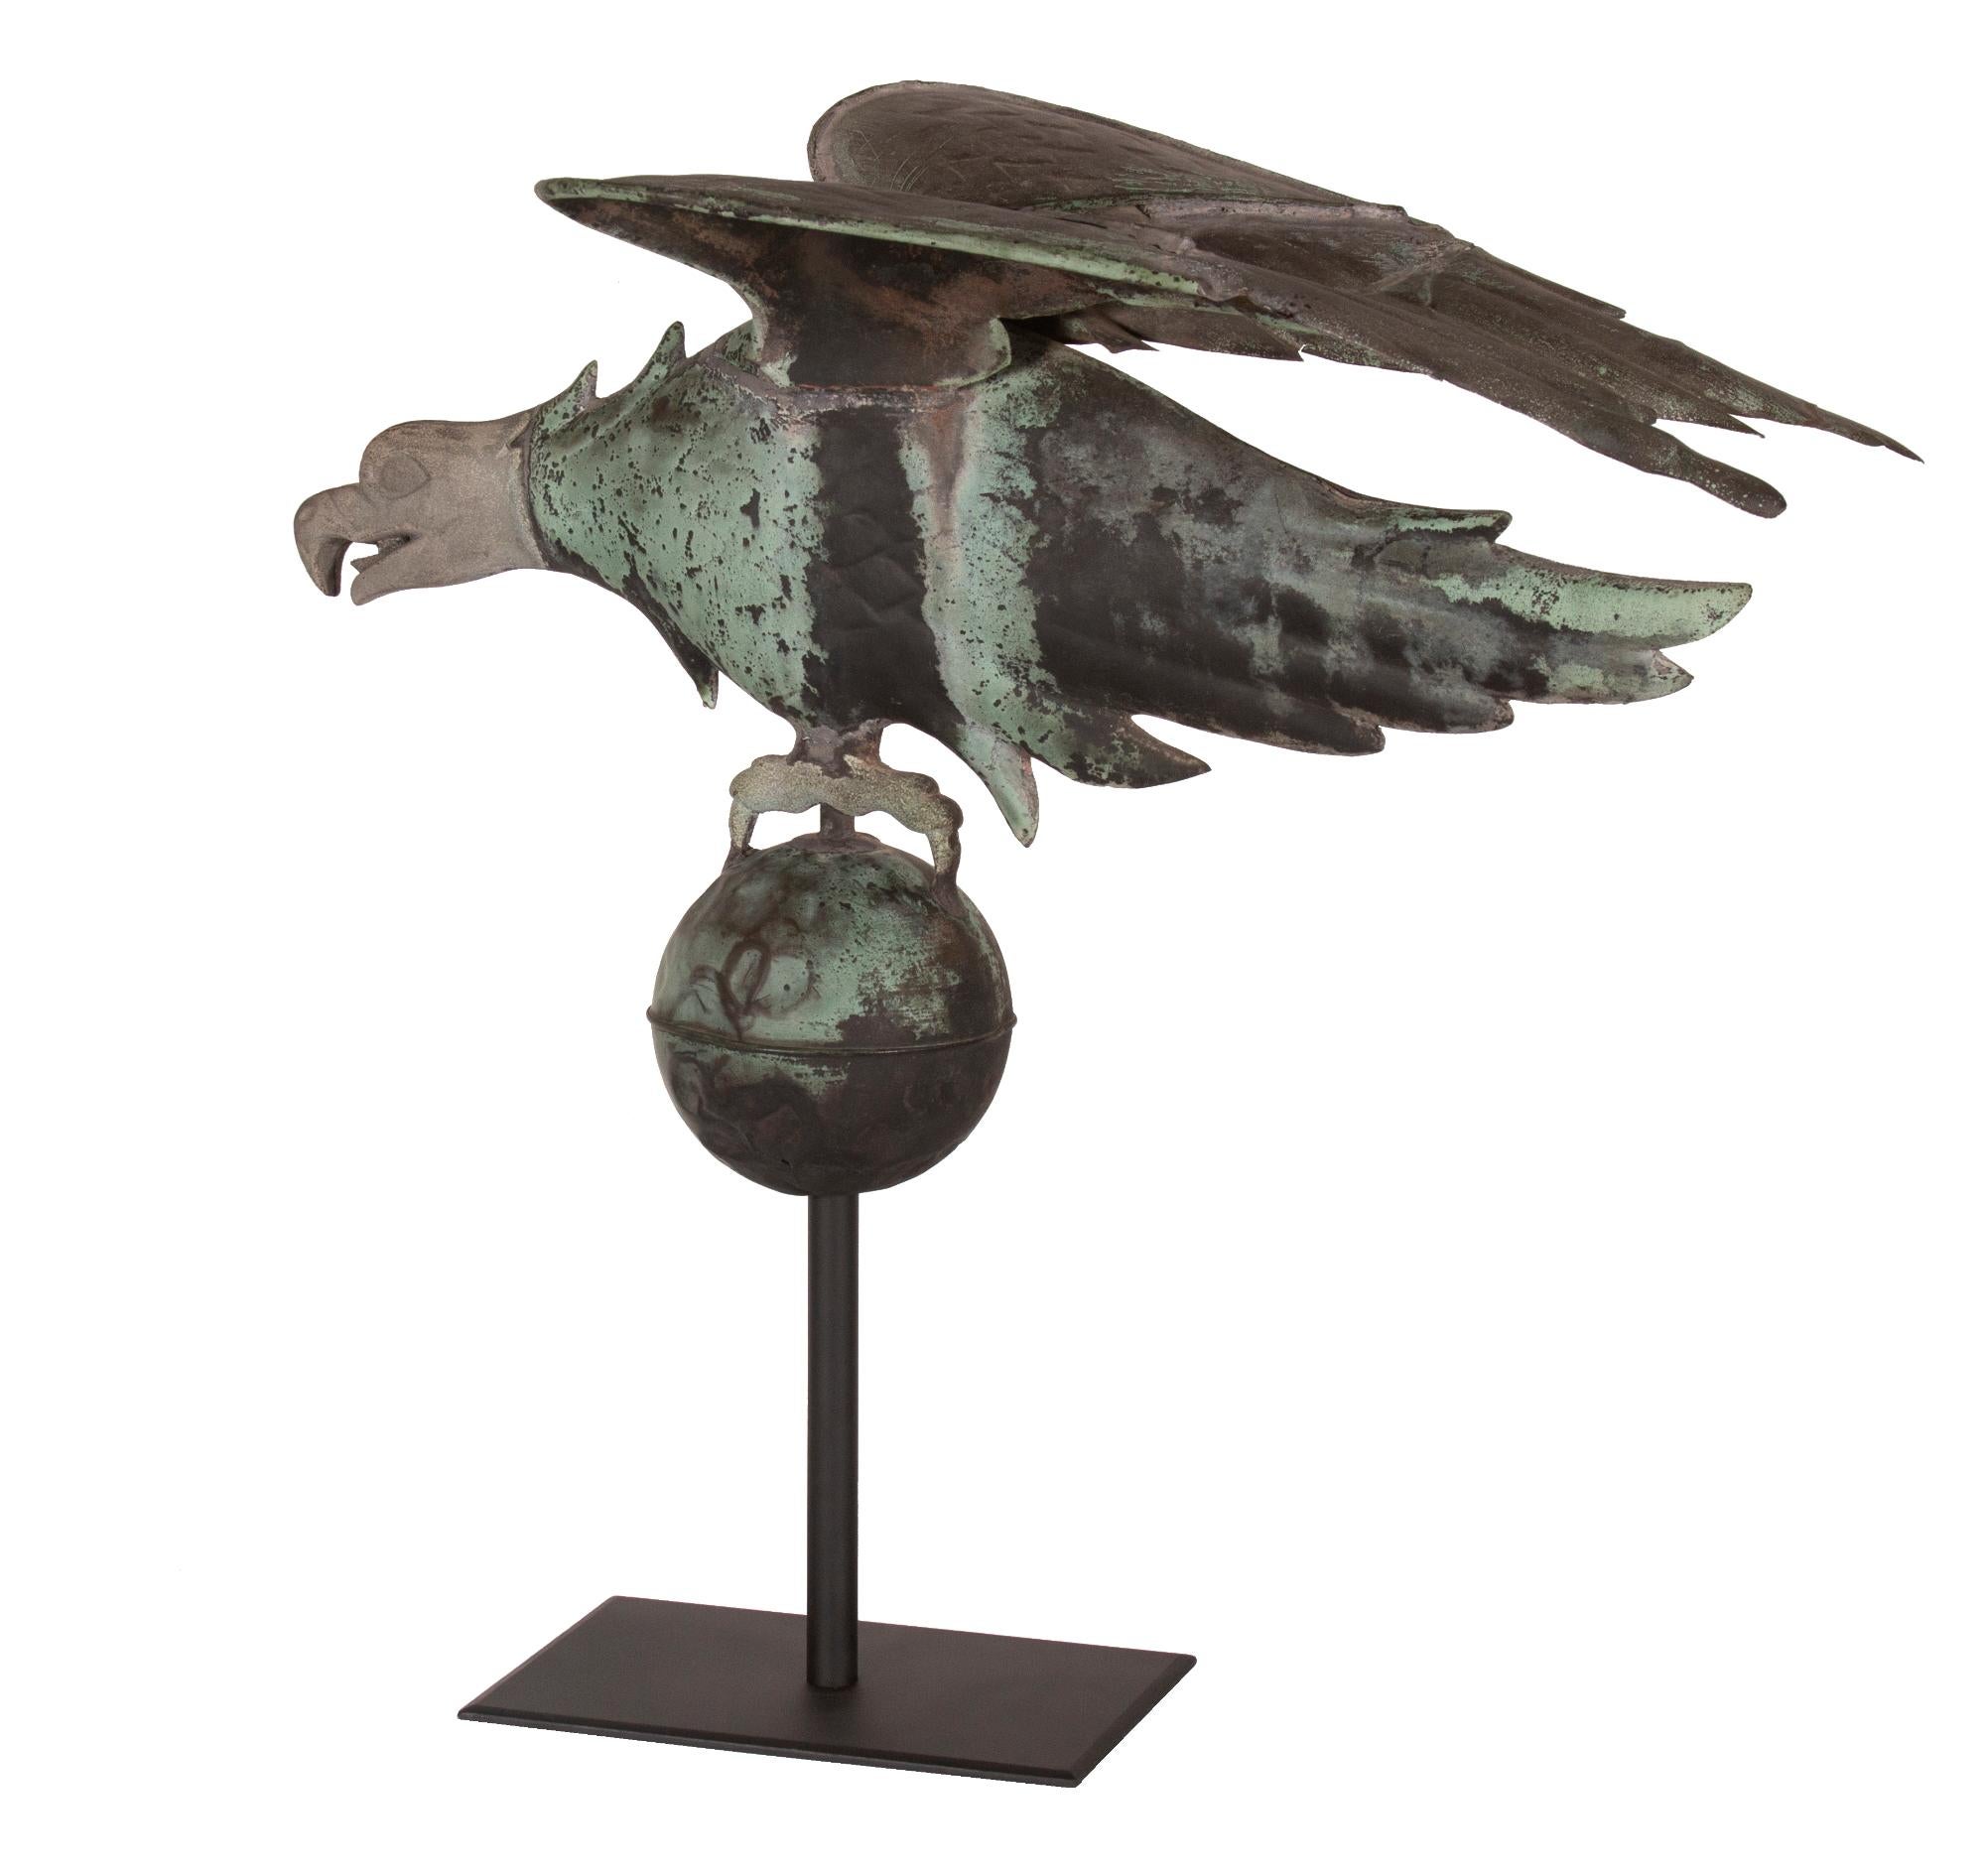 Eagle weathervane in a beautiful form with great folk presence, possibly made by A.L. JEWELL & CO. (1852-1867) or its predecessor, Cushing & White / L.W. Cushing (1867-1870’s), Waltham, Massachusetts:

Eagle weathervane, made of hammered copper